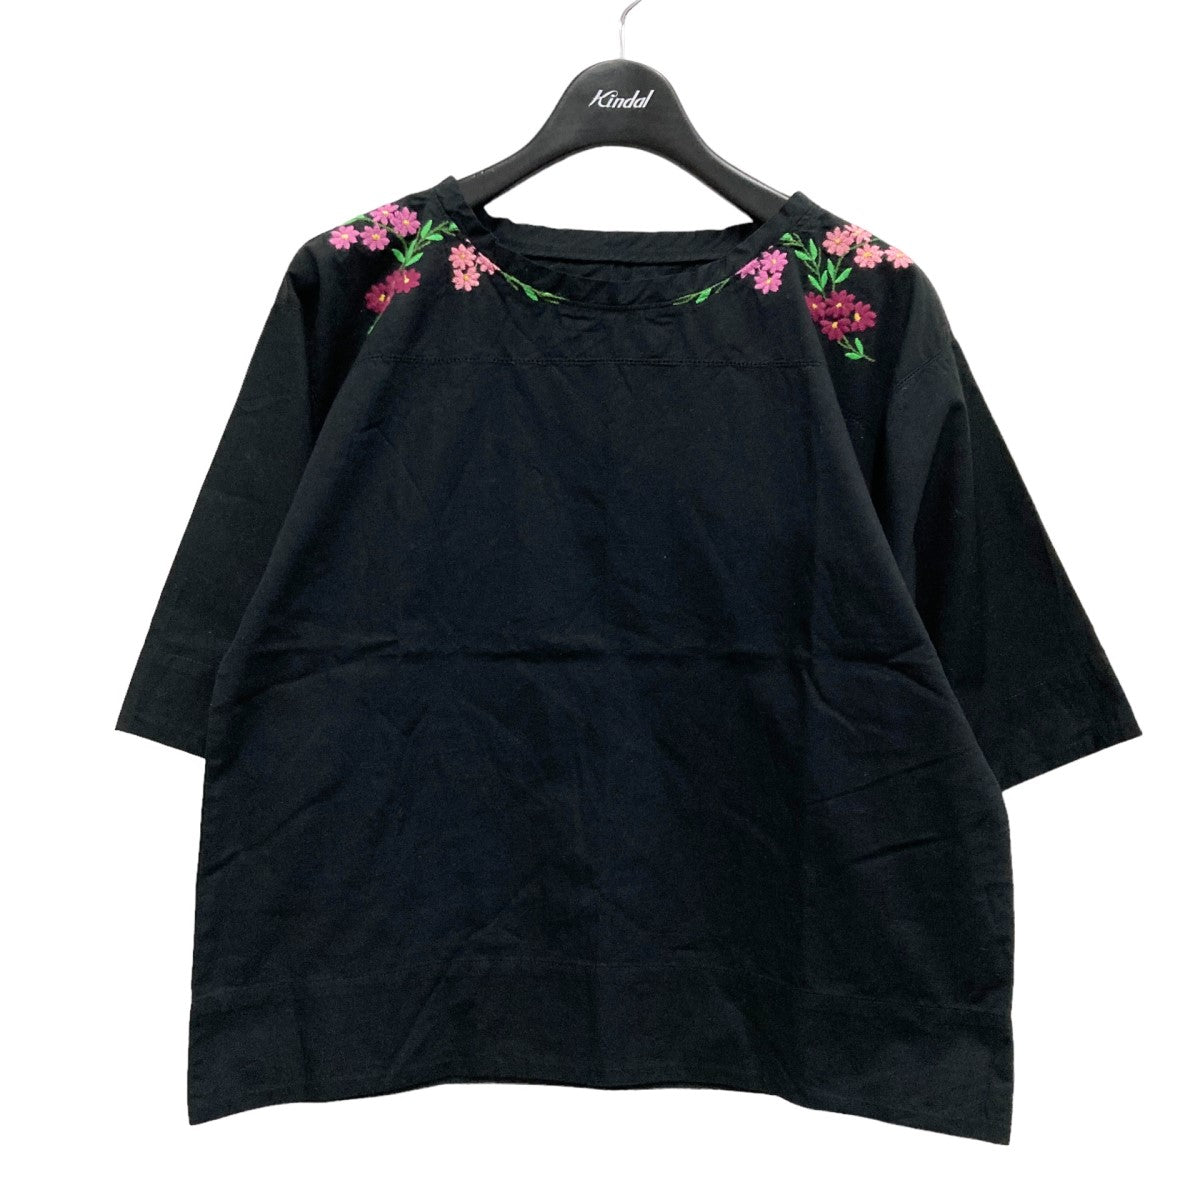 tricot COMME des GARCONS(トリココムデギャルソン) 花柄刺繍ブラウス ...